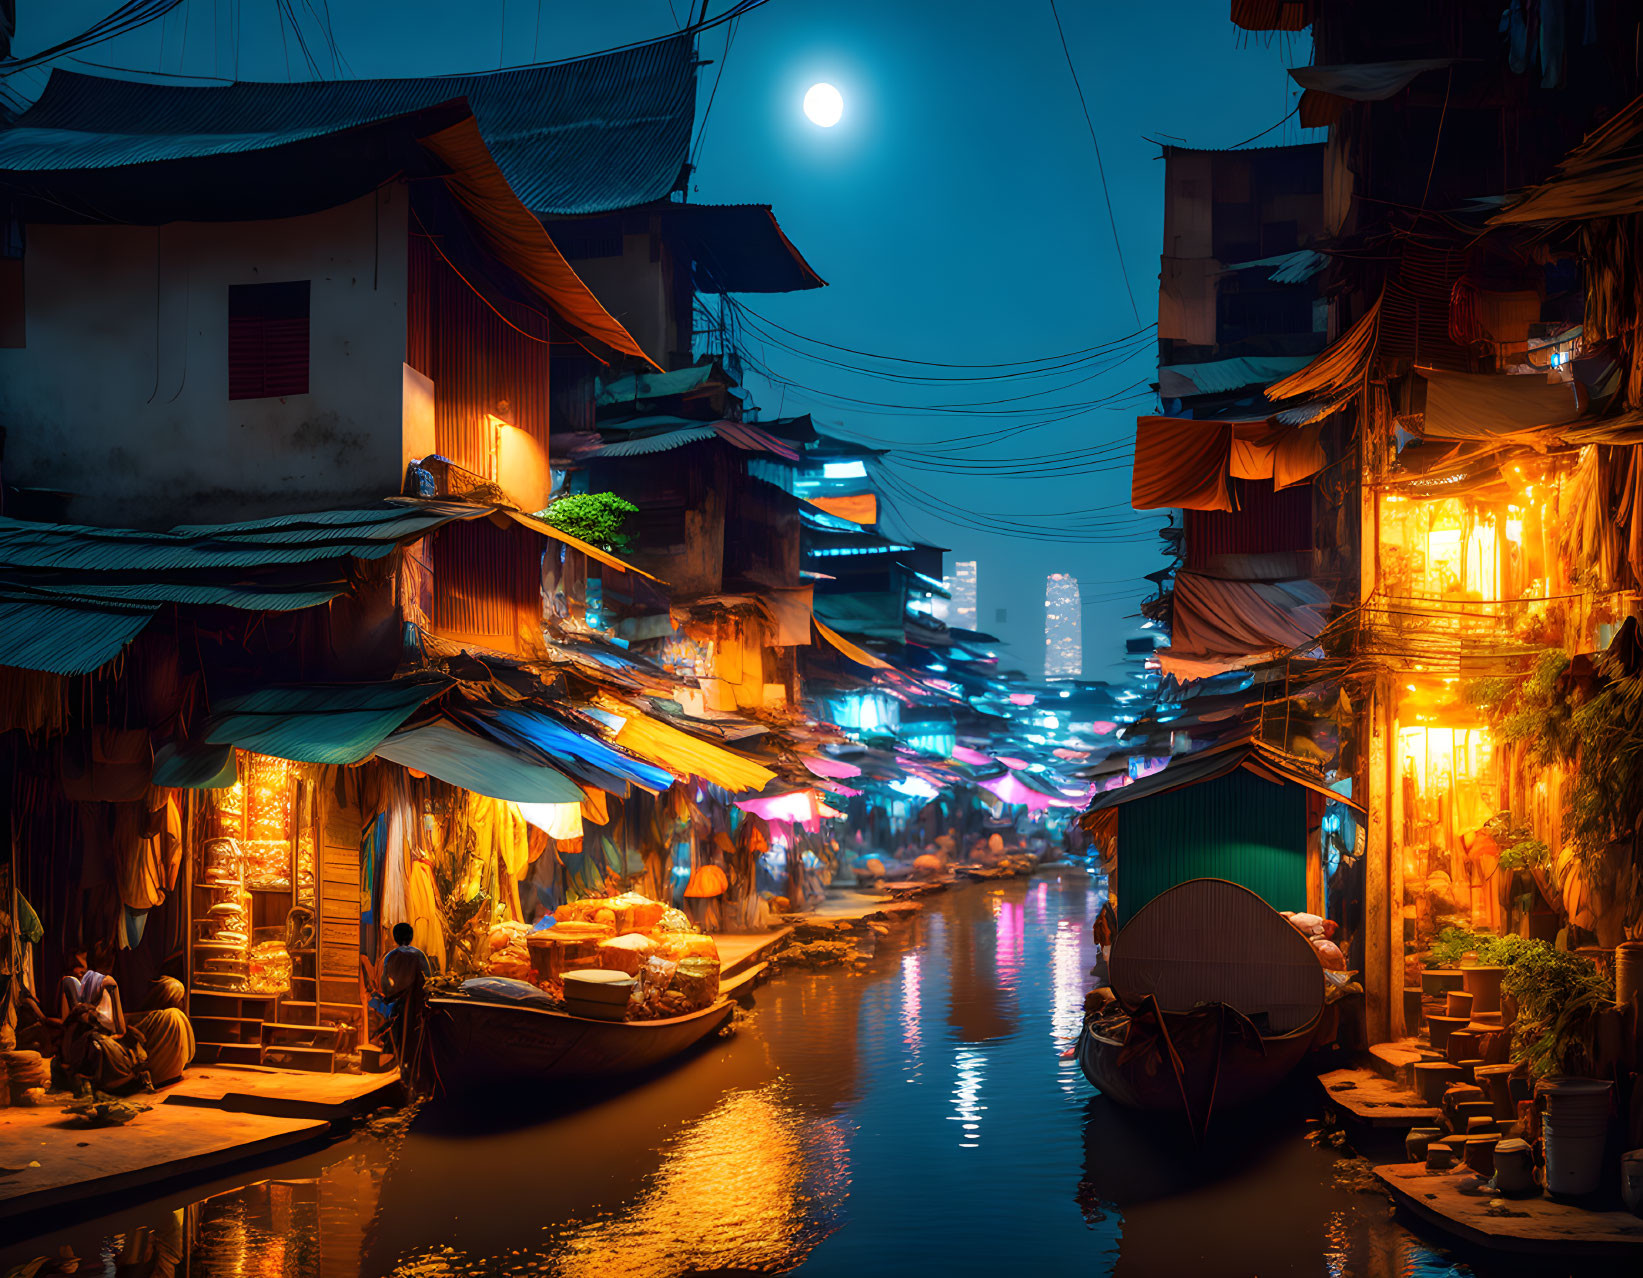 Colorful night market by canal with illuminated stalls, boats, and city skyline under full moon